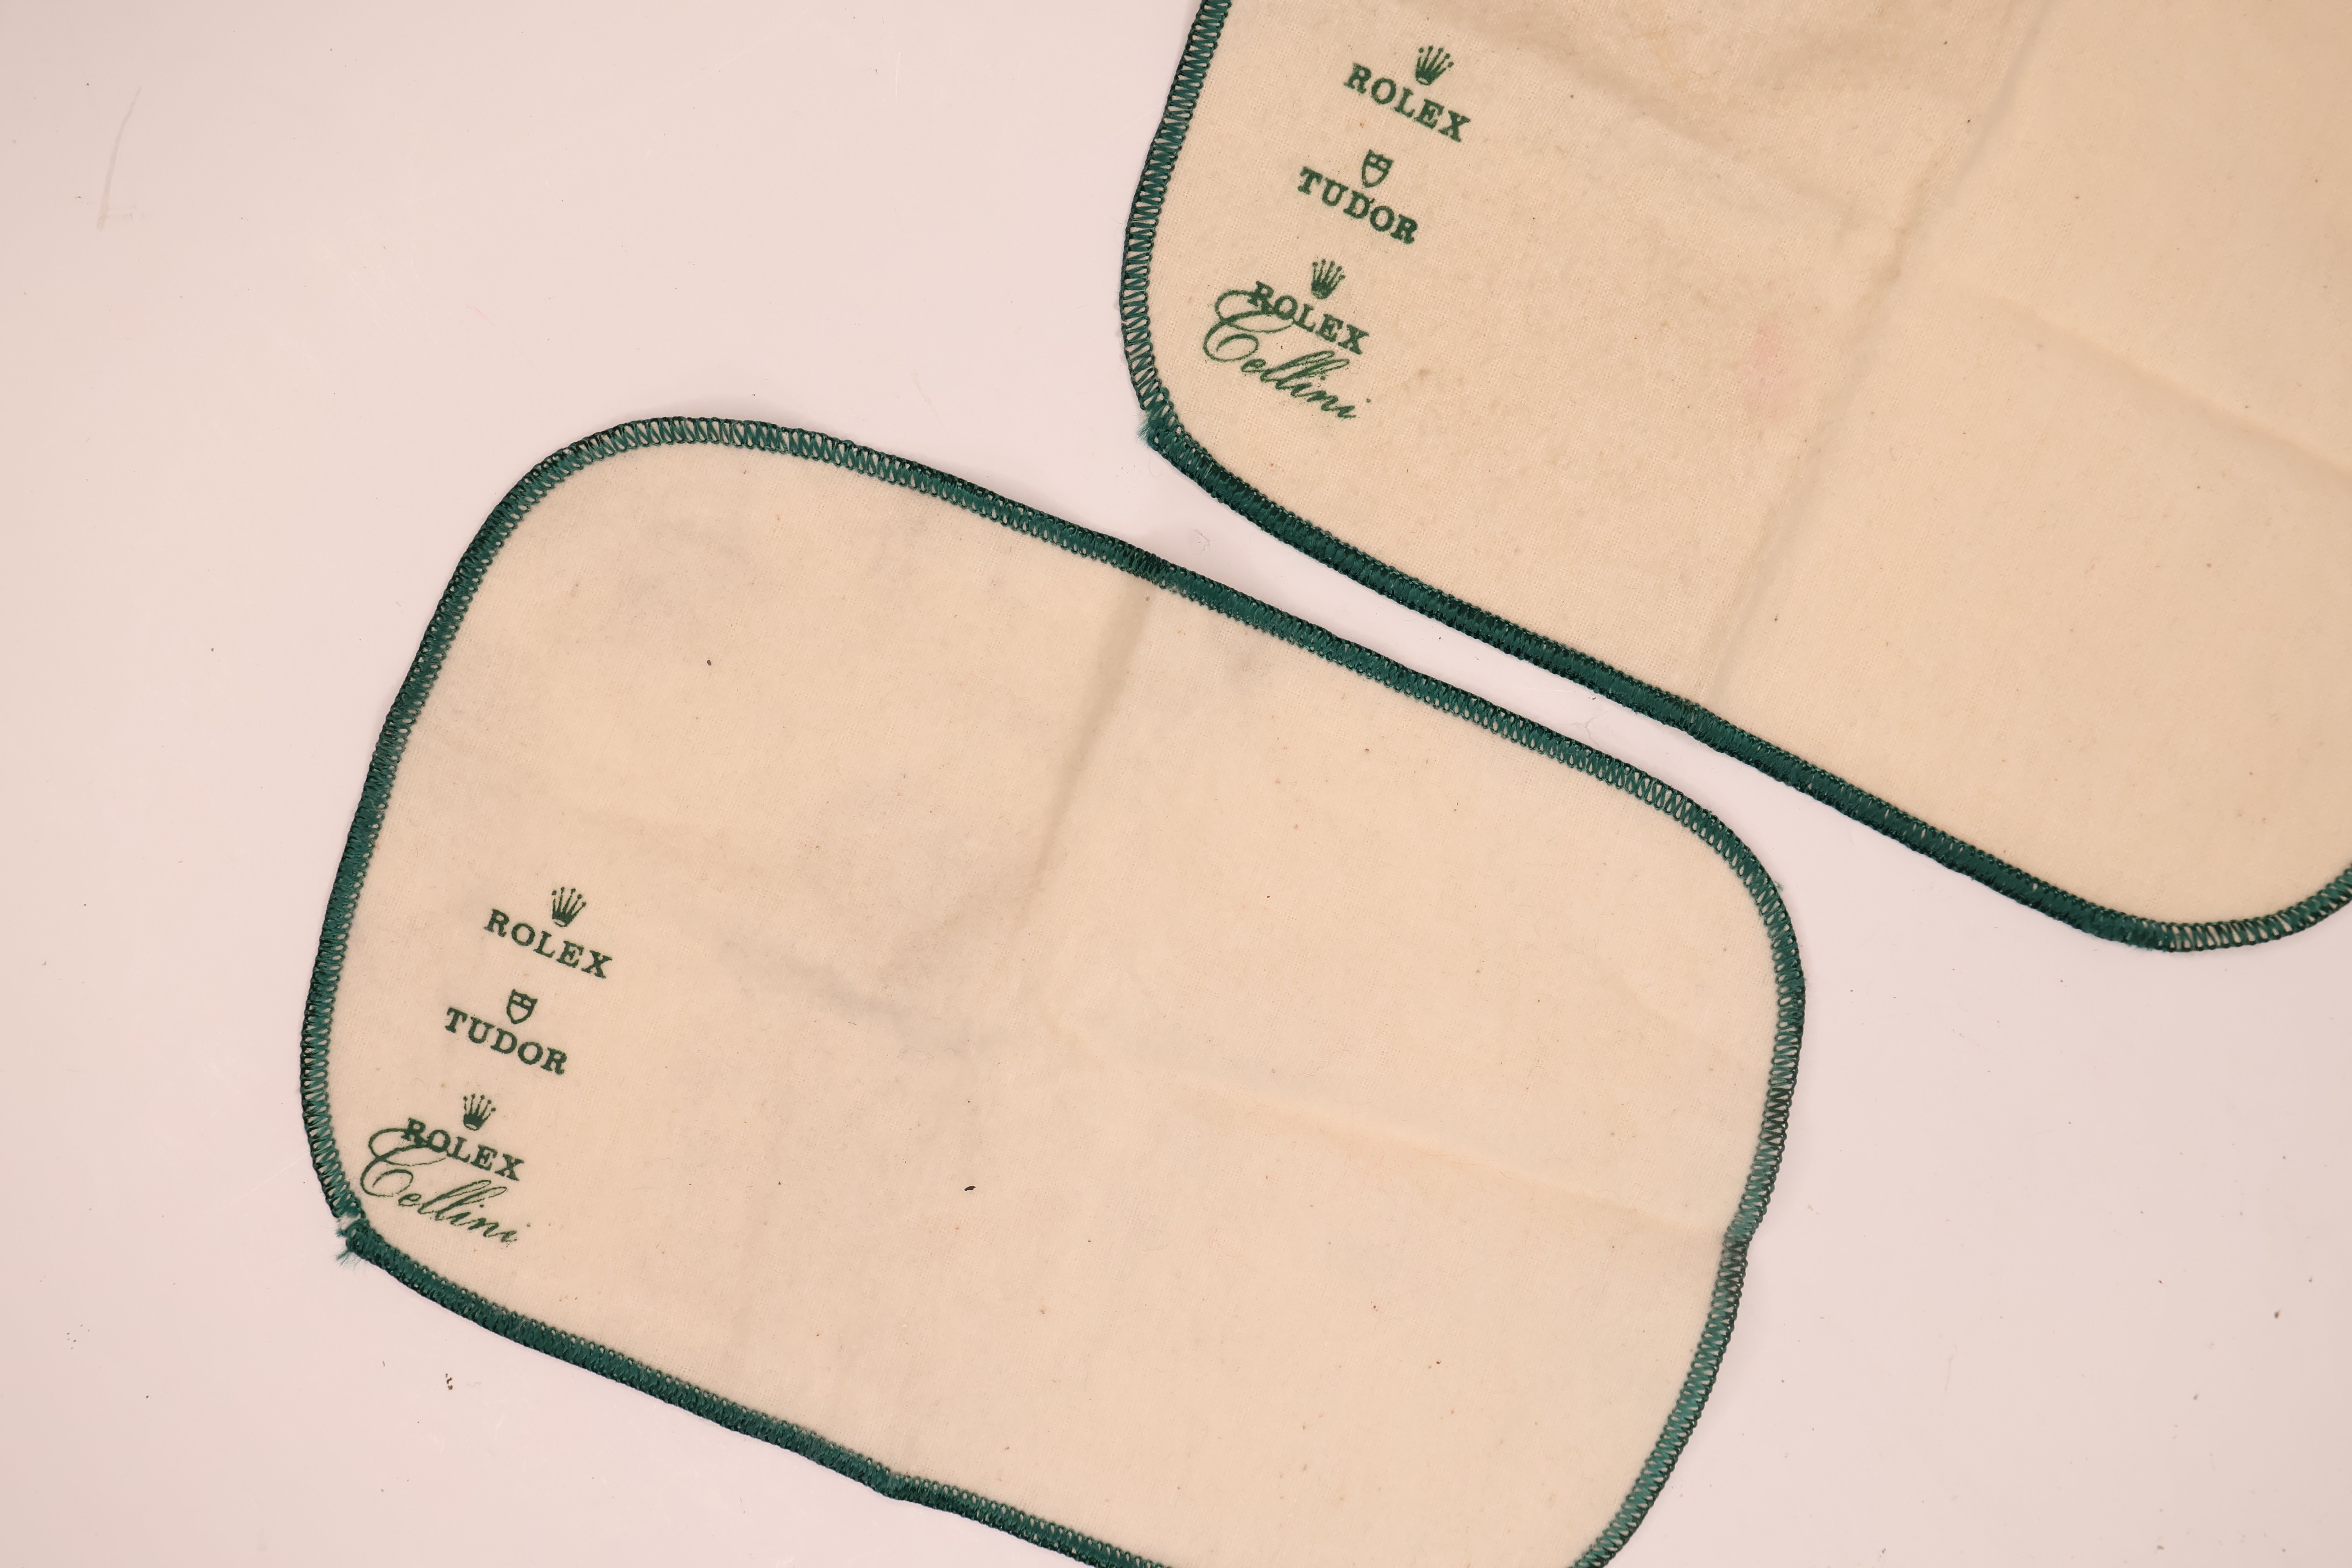 *To Be Sold Without Reserve* Rolex and Tudor cleaning cloths (2) - Image 2 of 3